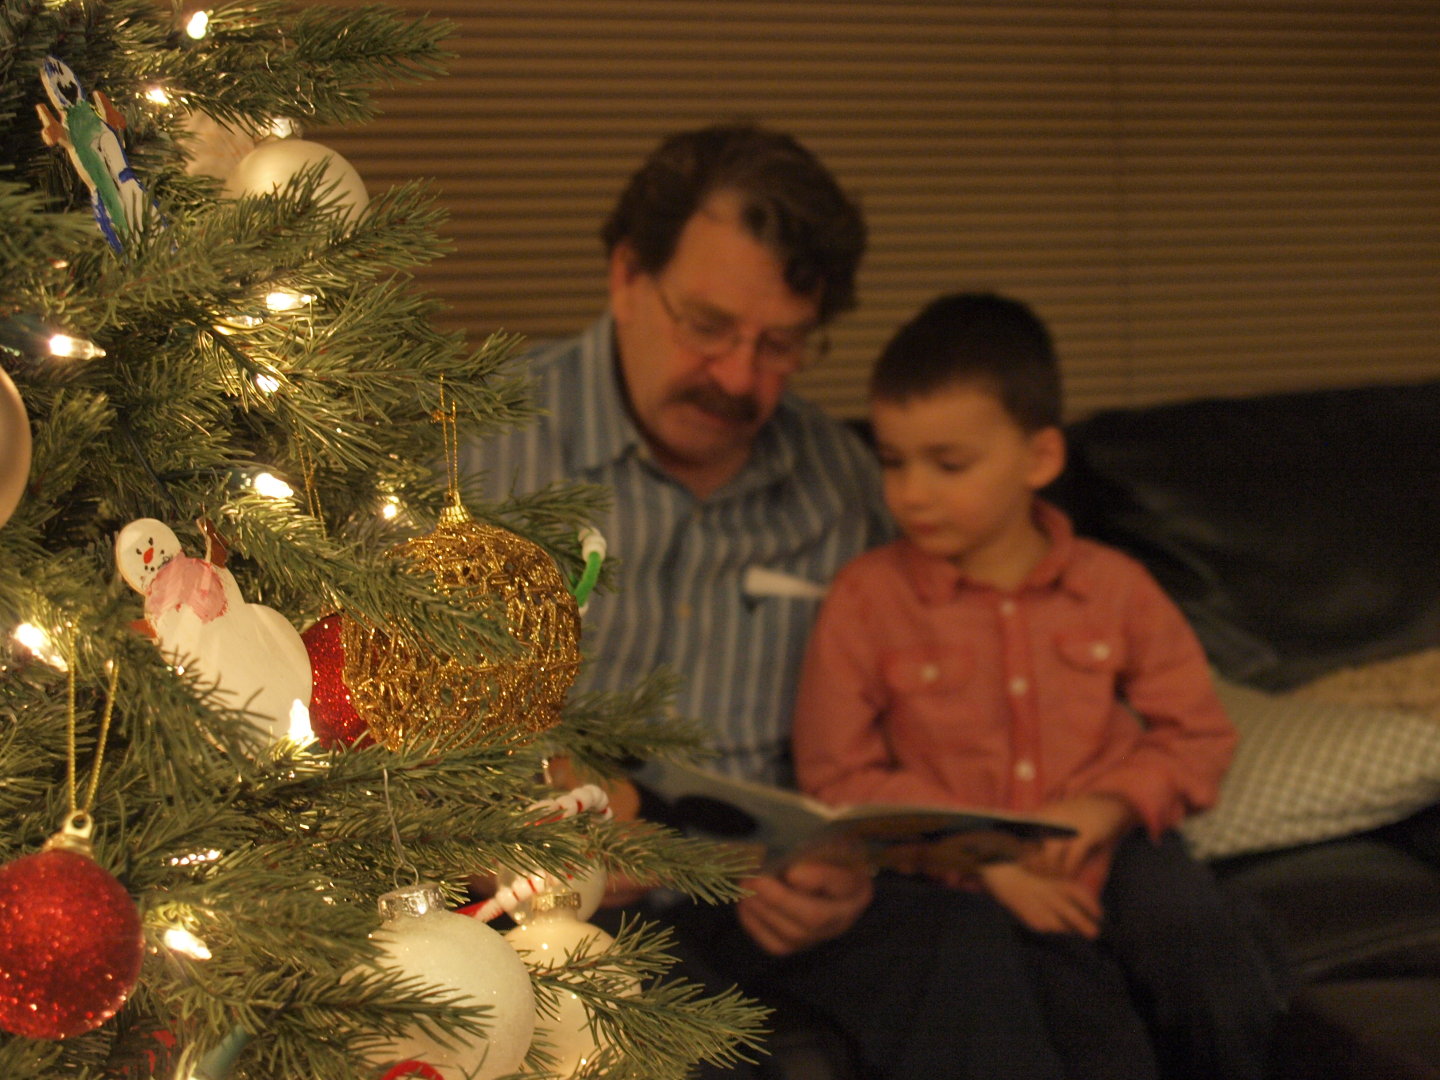 Storytime with Grandpa By The Christmas Tree